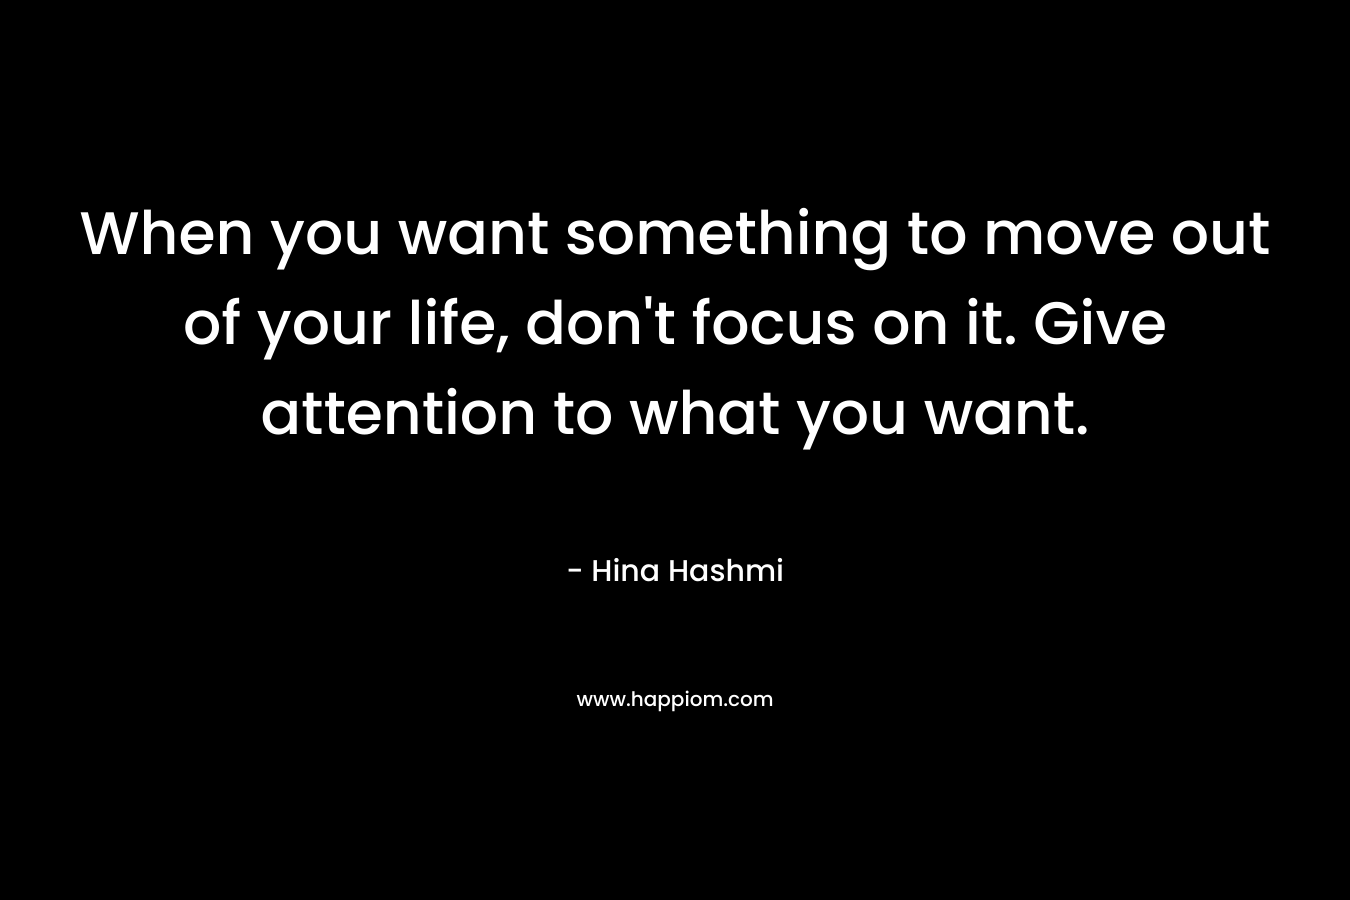 When you want something to move out of your life, don't focus on it. Give attention to what you want.